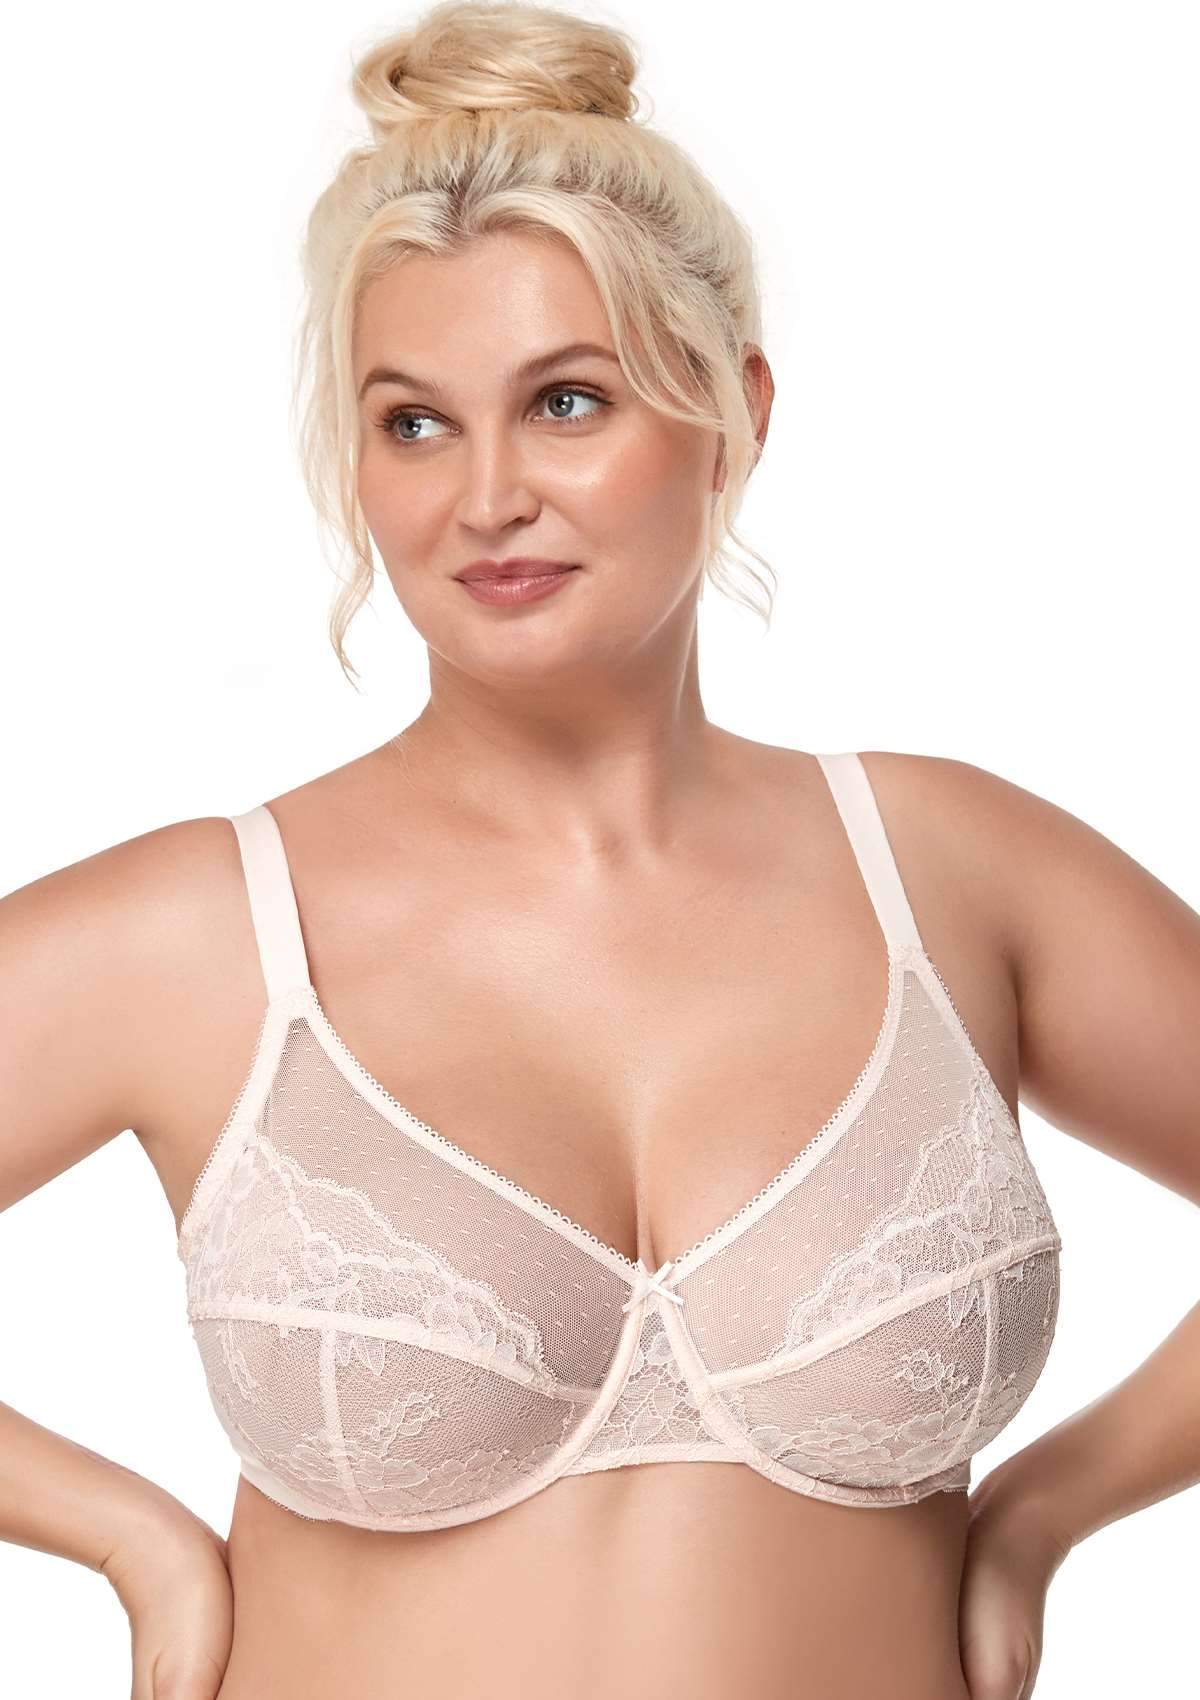 HSIA Enchante Lacy Bra: Comfy Sheer Lace Bra With Lift - Dusty Peach / 42 / D